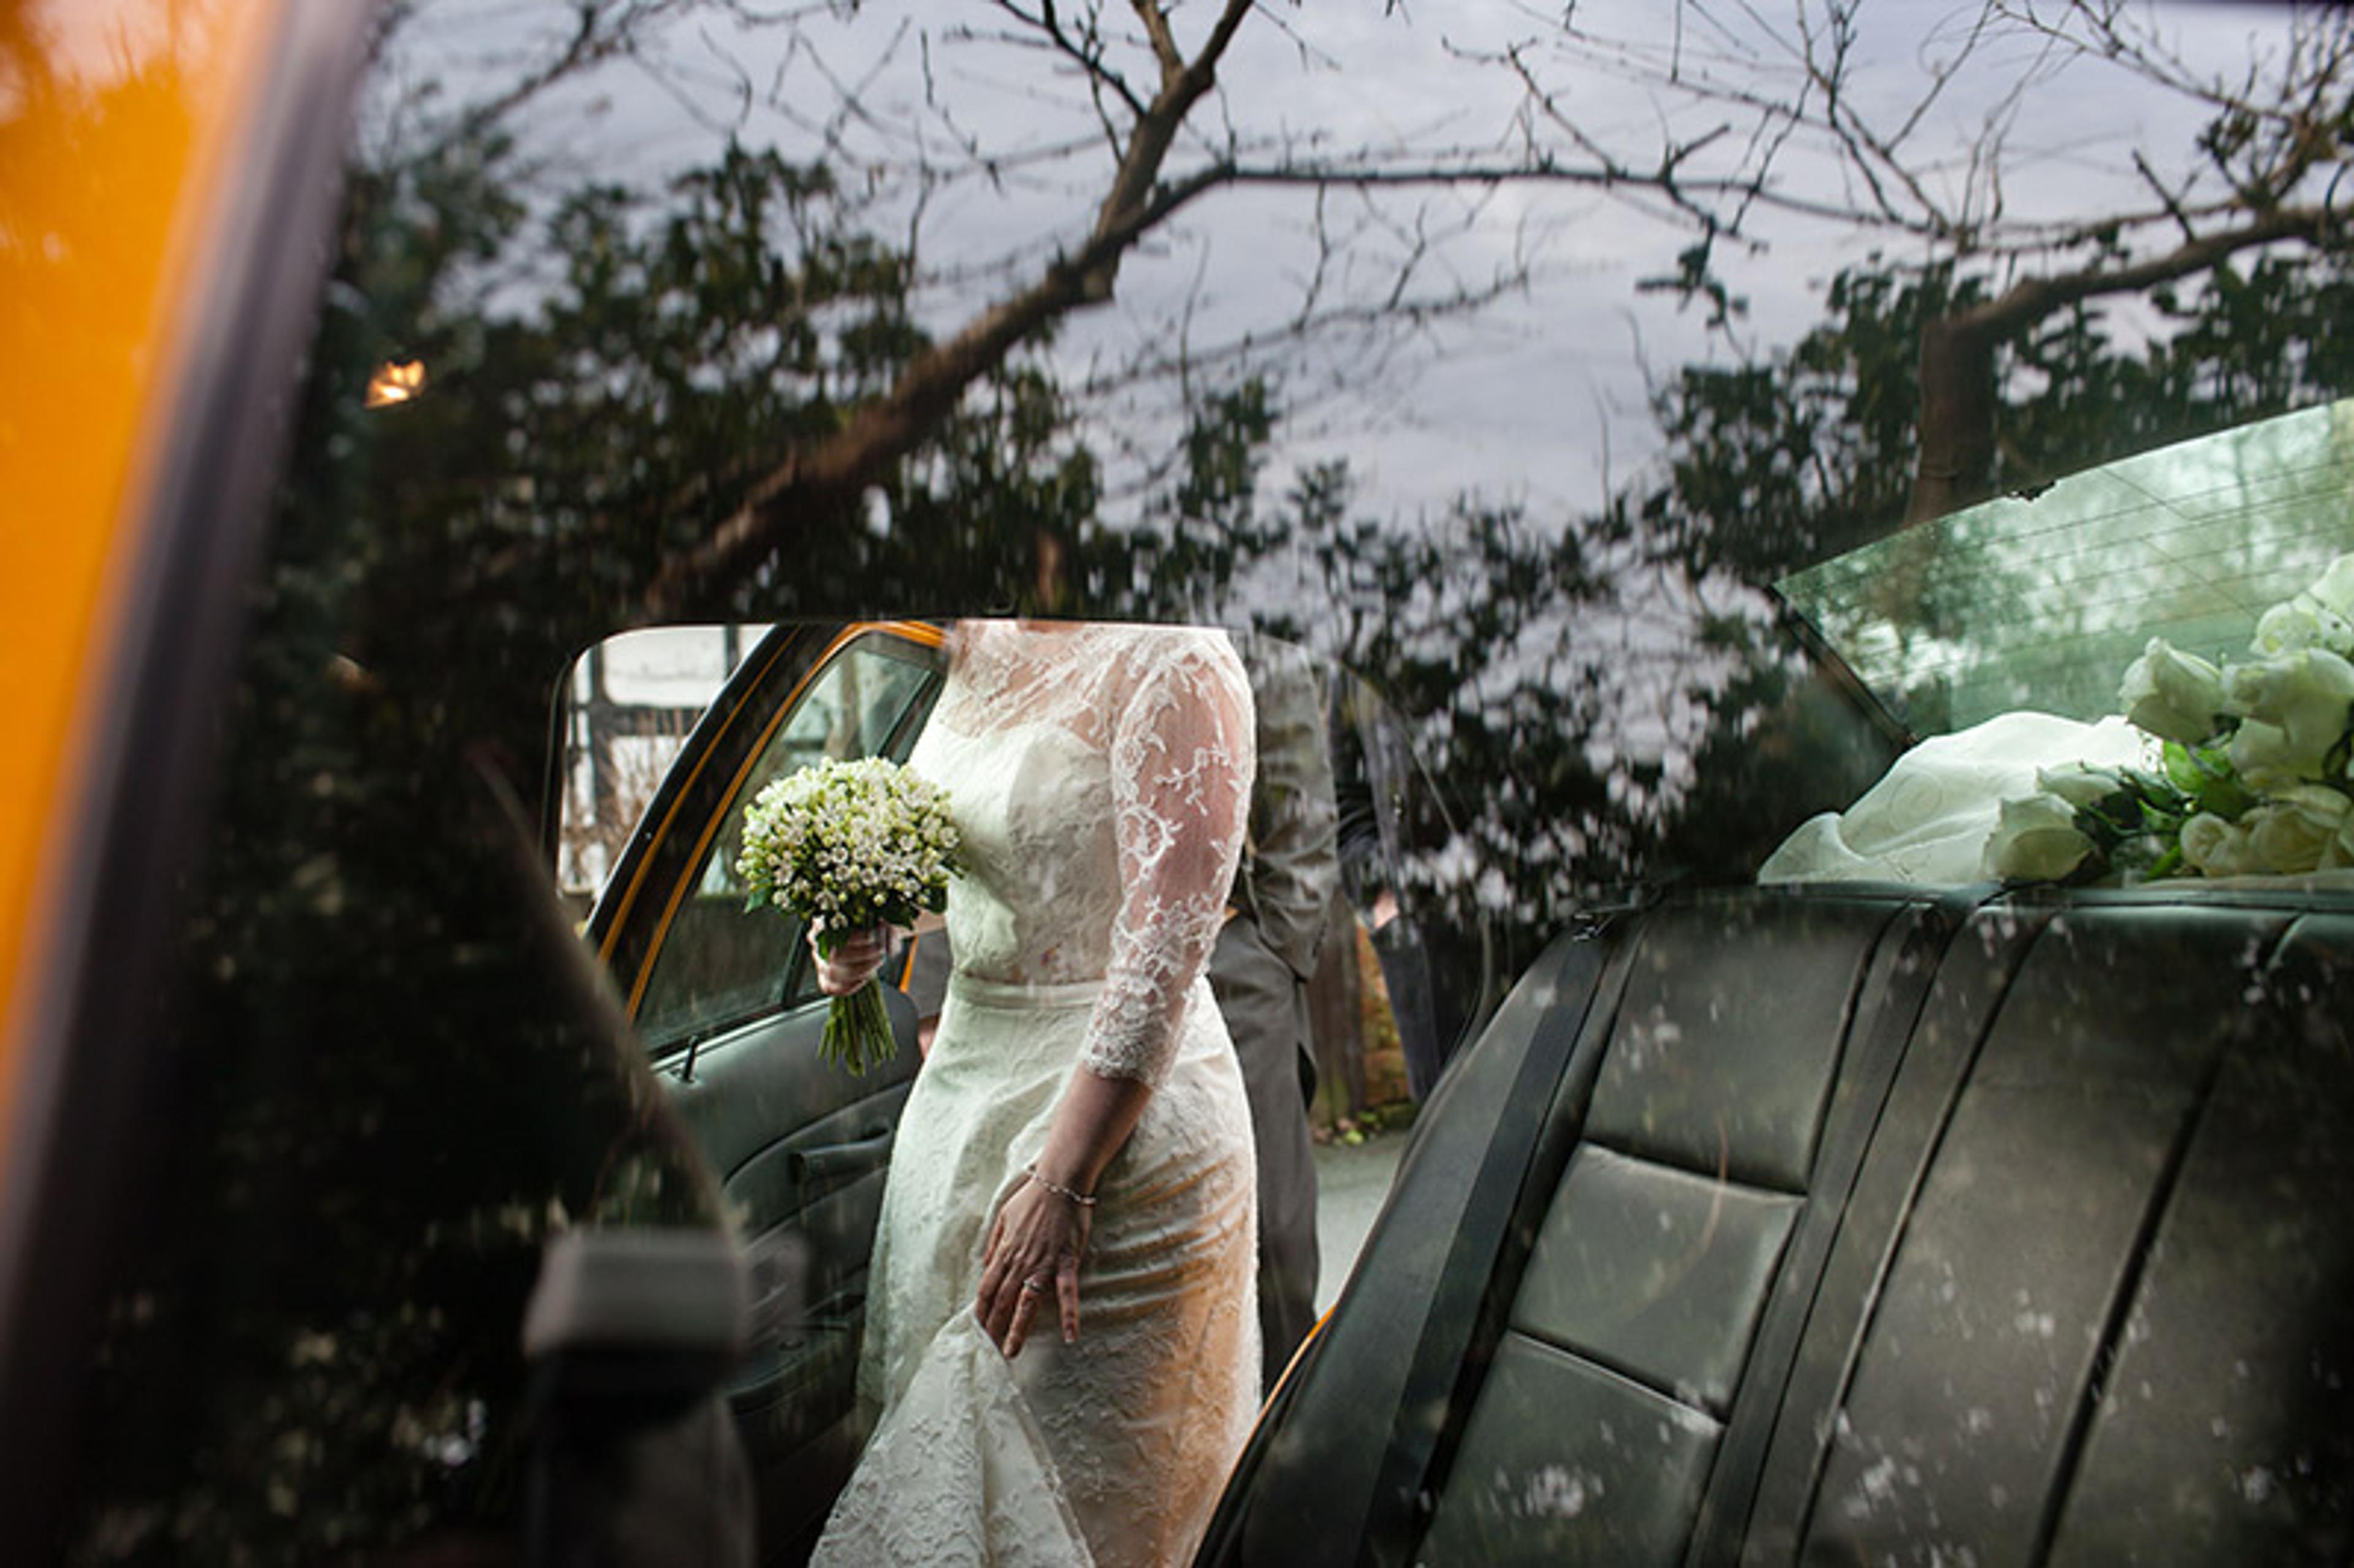 A bride holding flowers is seen about to get into a car. The photo is taken through the glass of the car window on the opposite side of the car and the bride’s head is not visible. There are numerous reflections in the glass